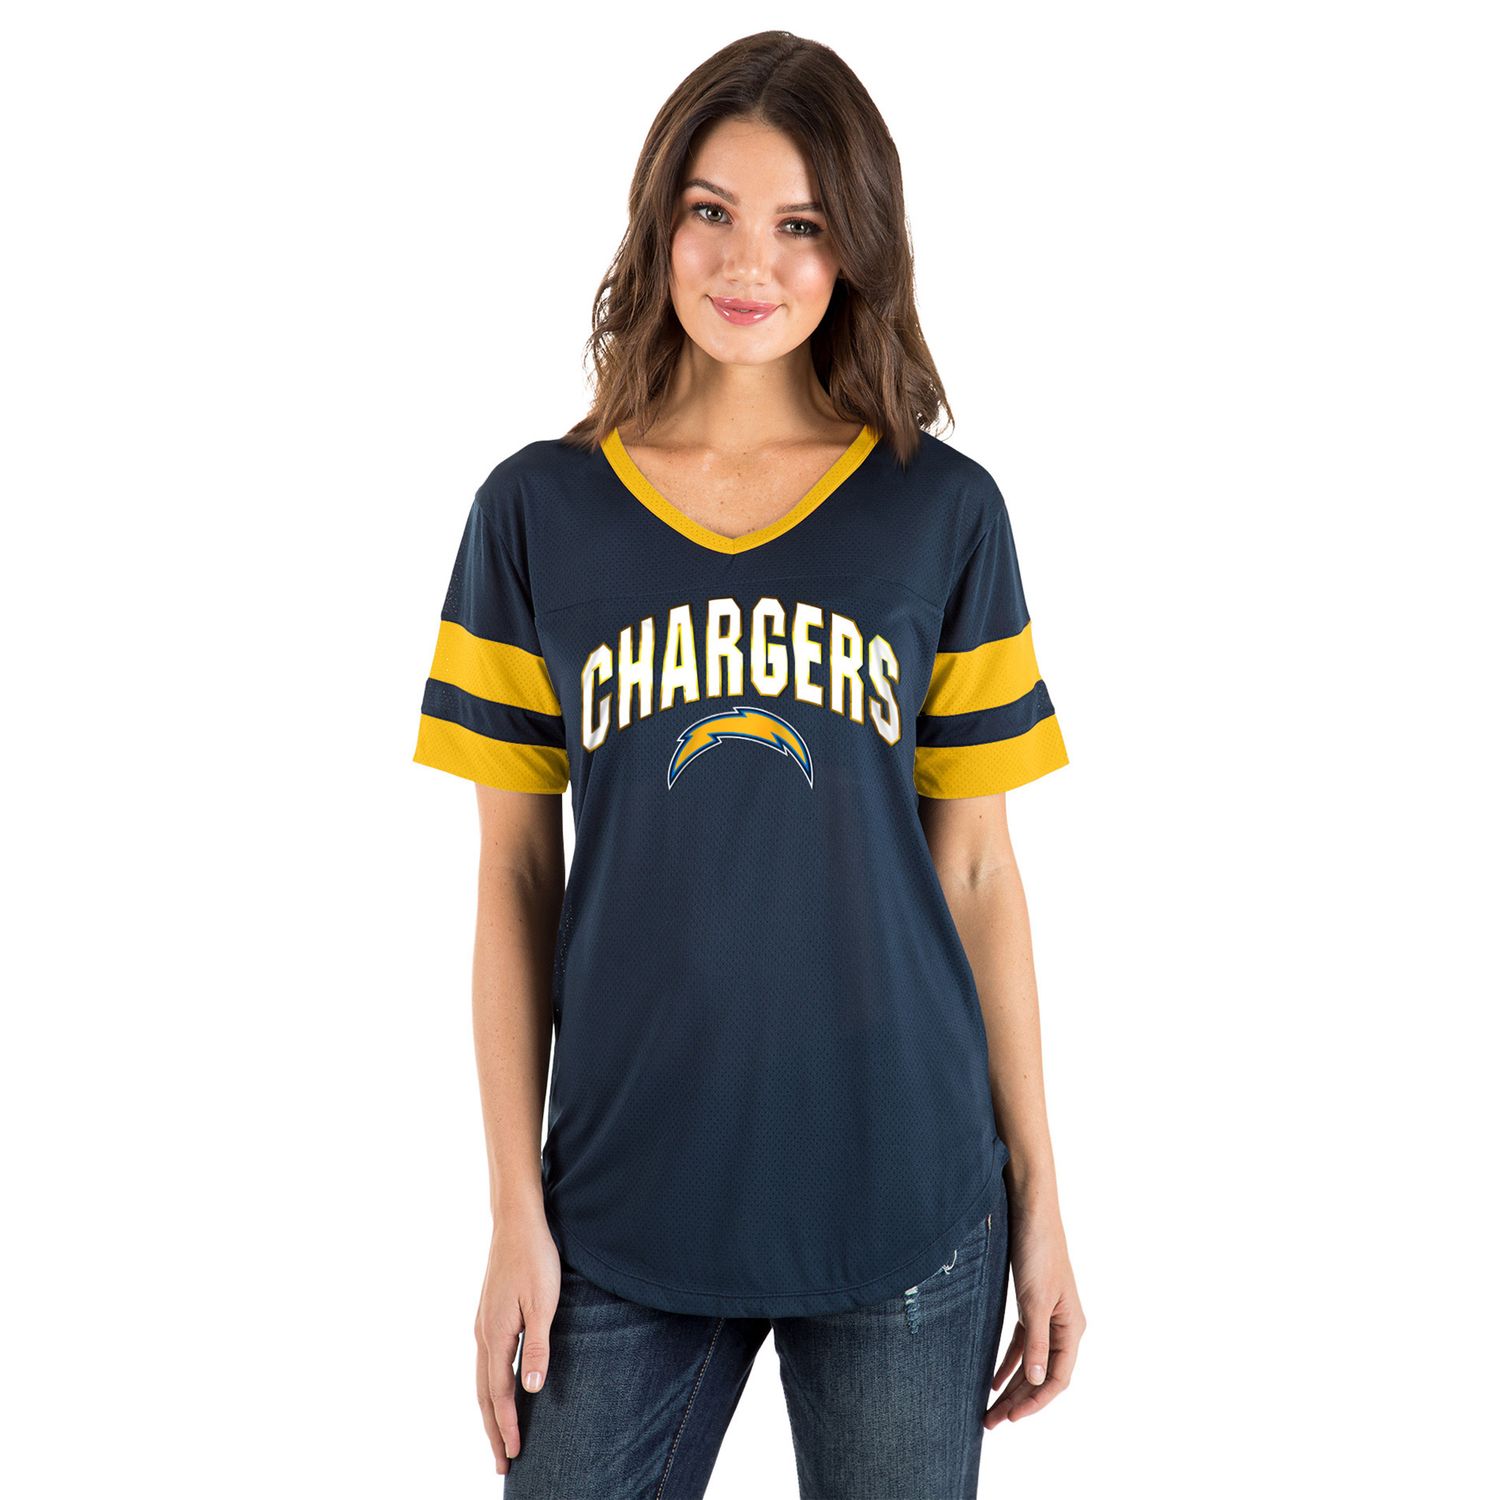 chargers female jersey